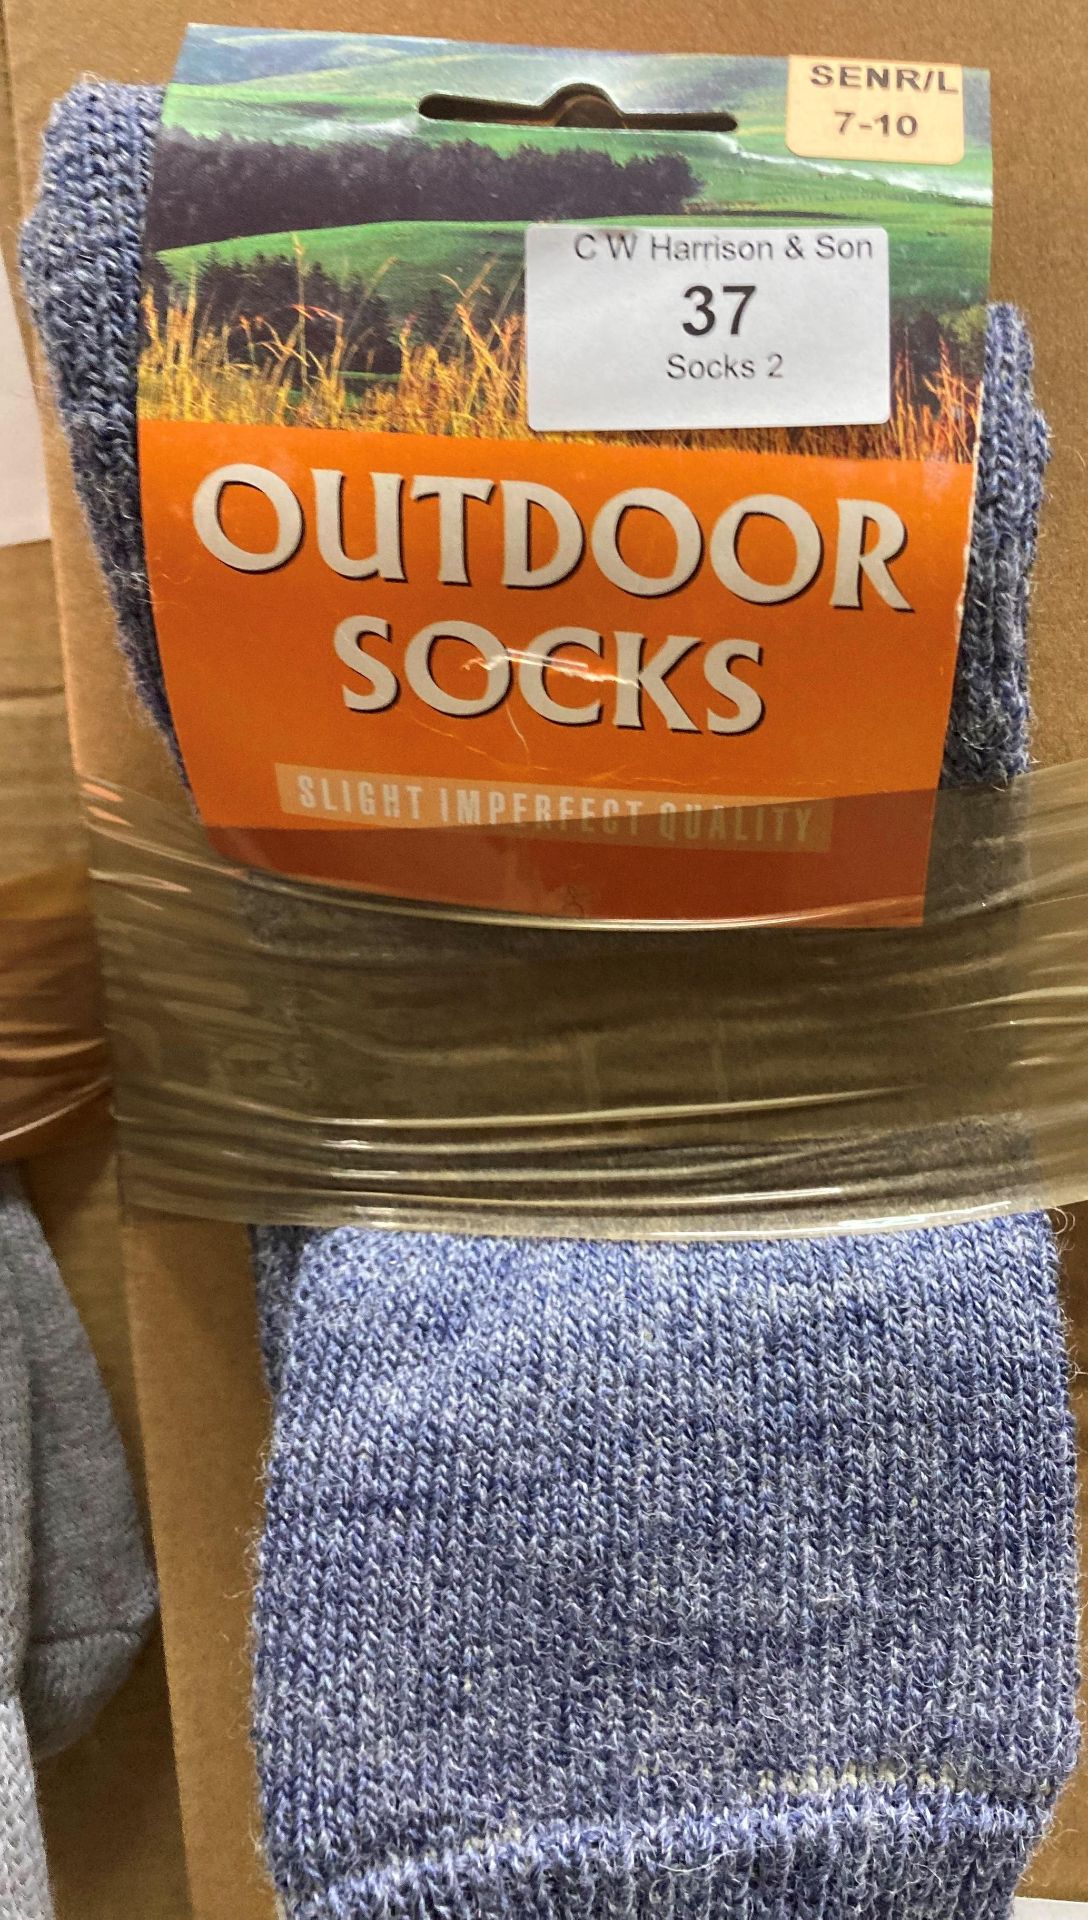 24 x pairs of Outdoor Socks (slight imperfections) size 7-10,